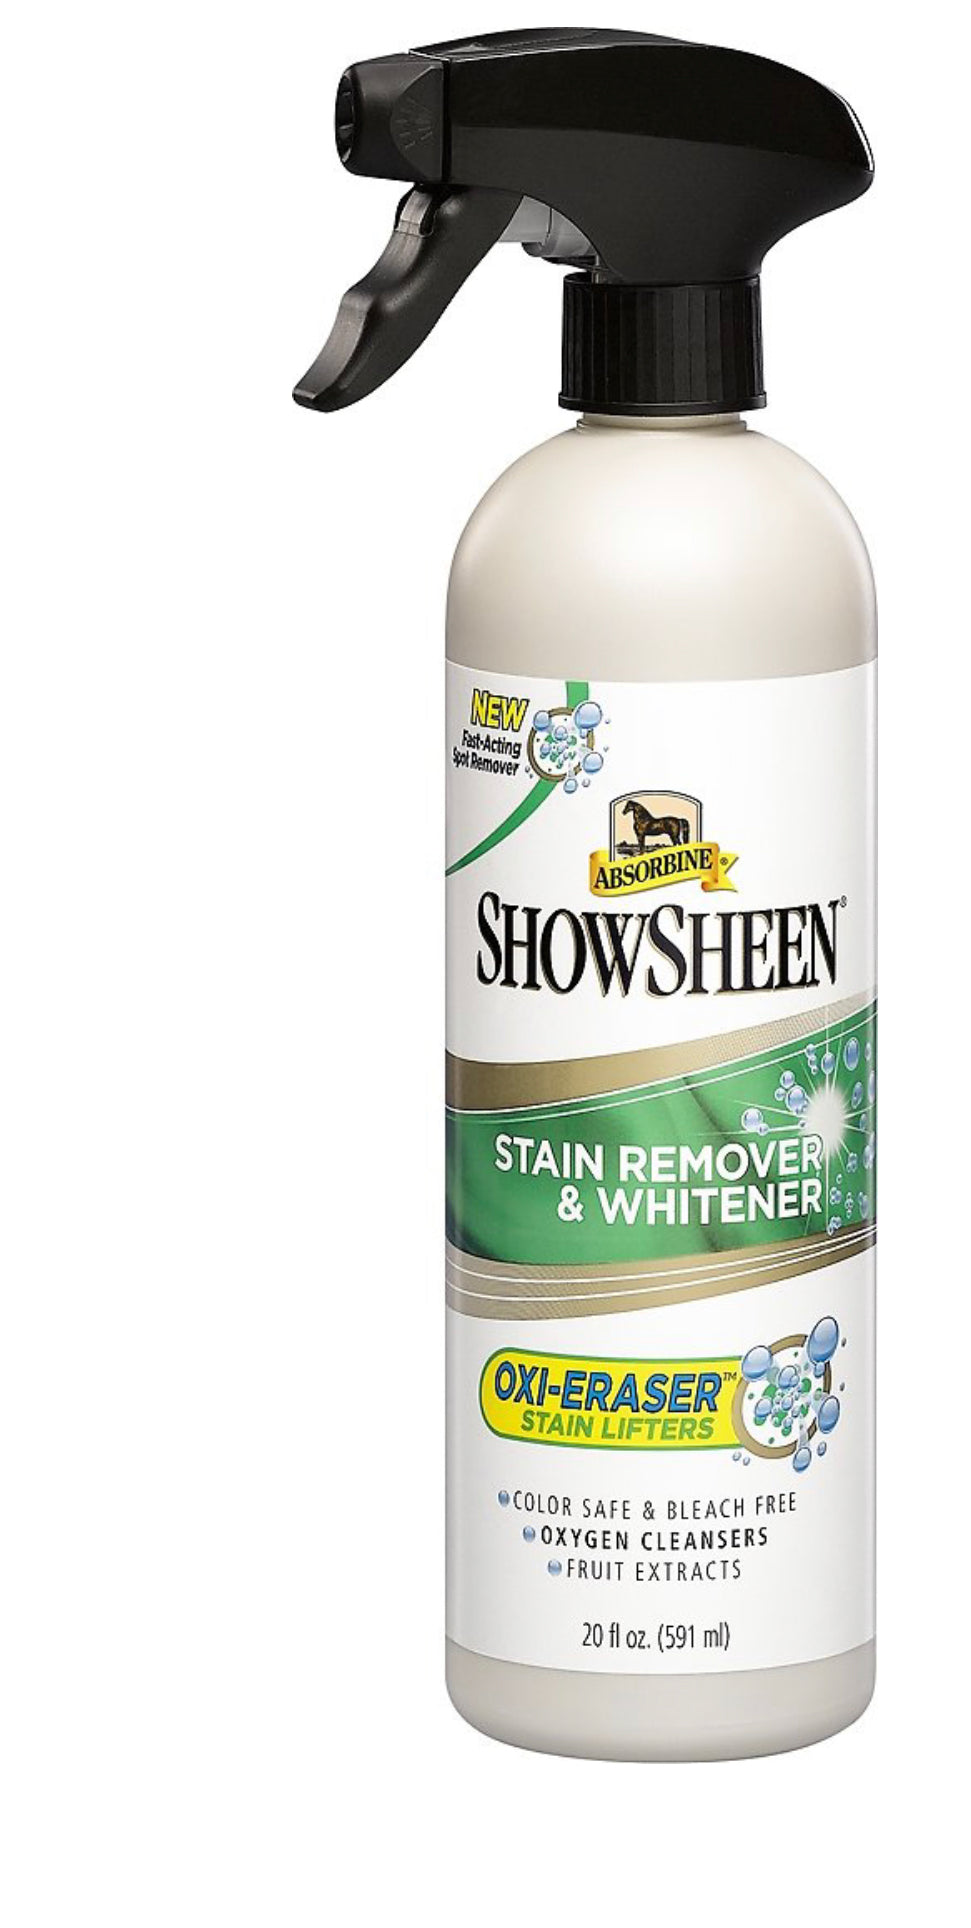 Show sheen stain remover